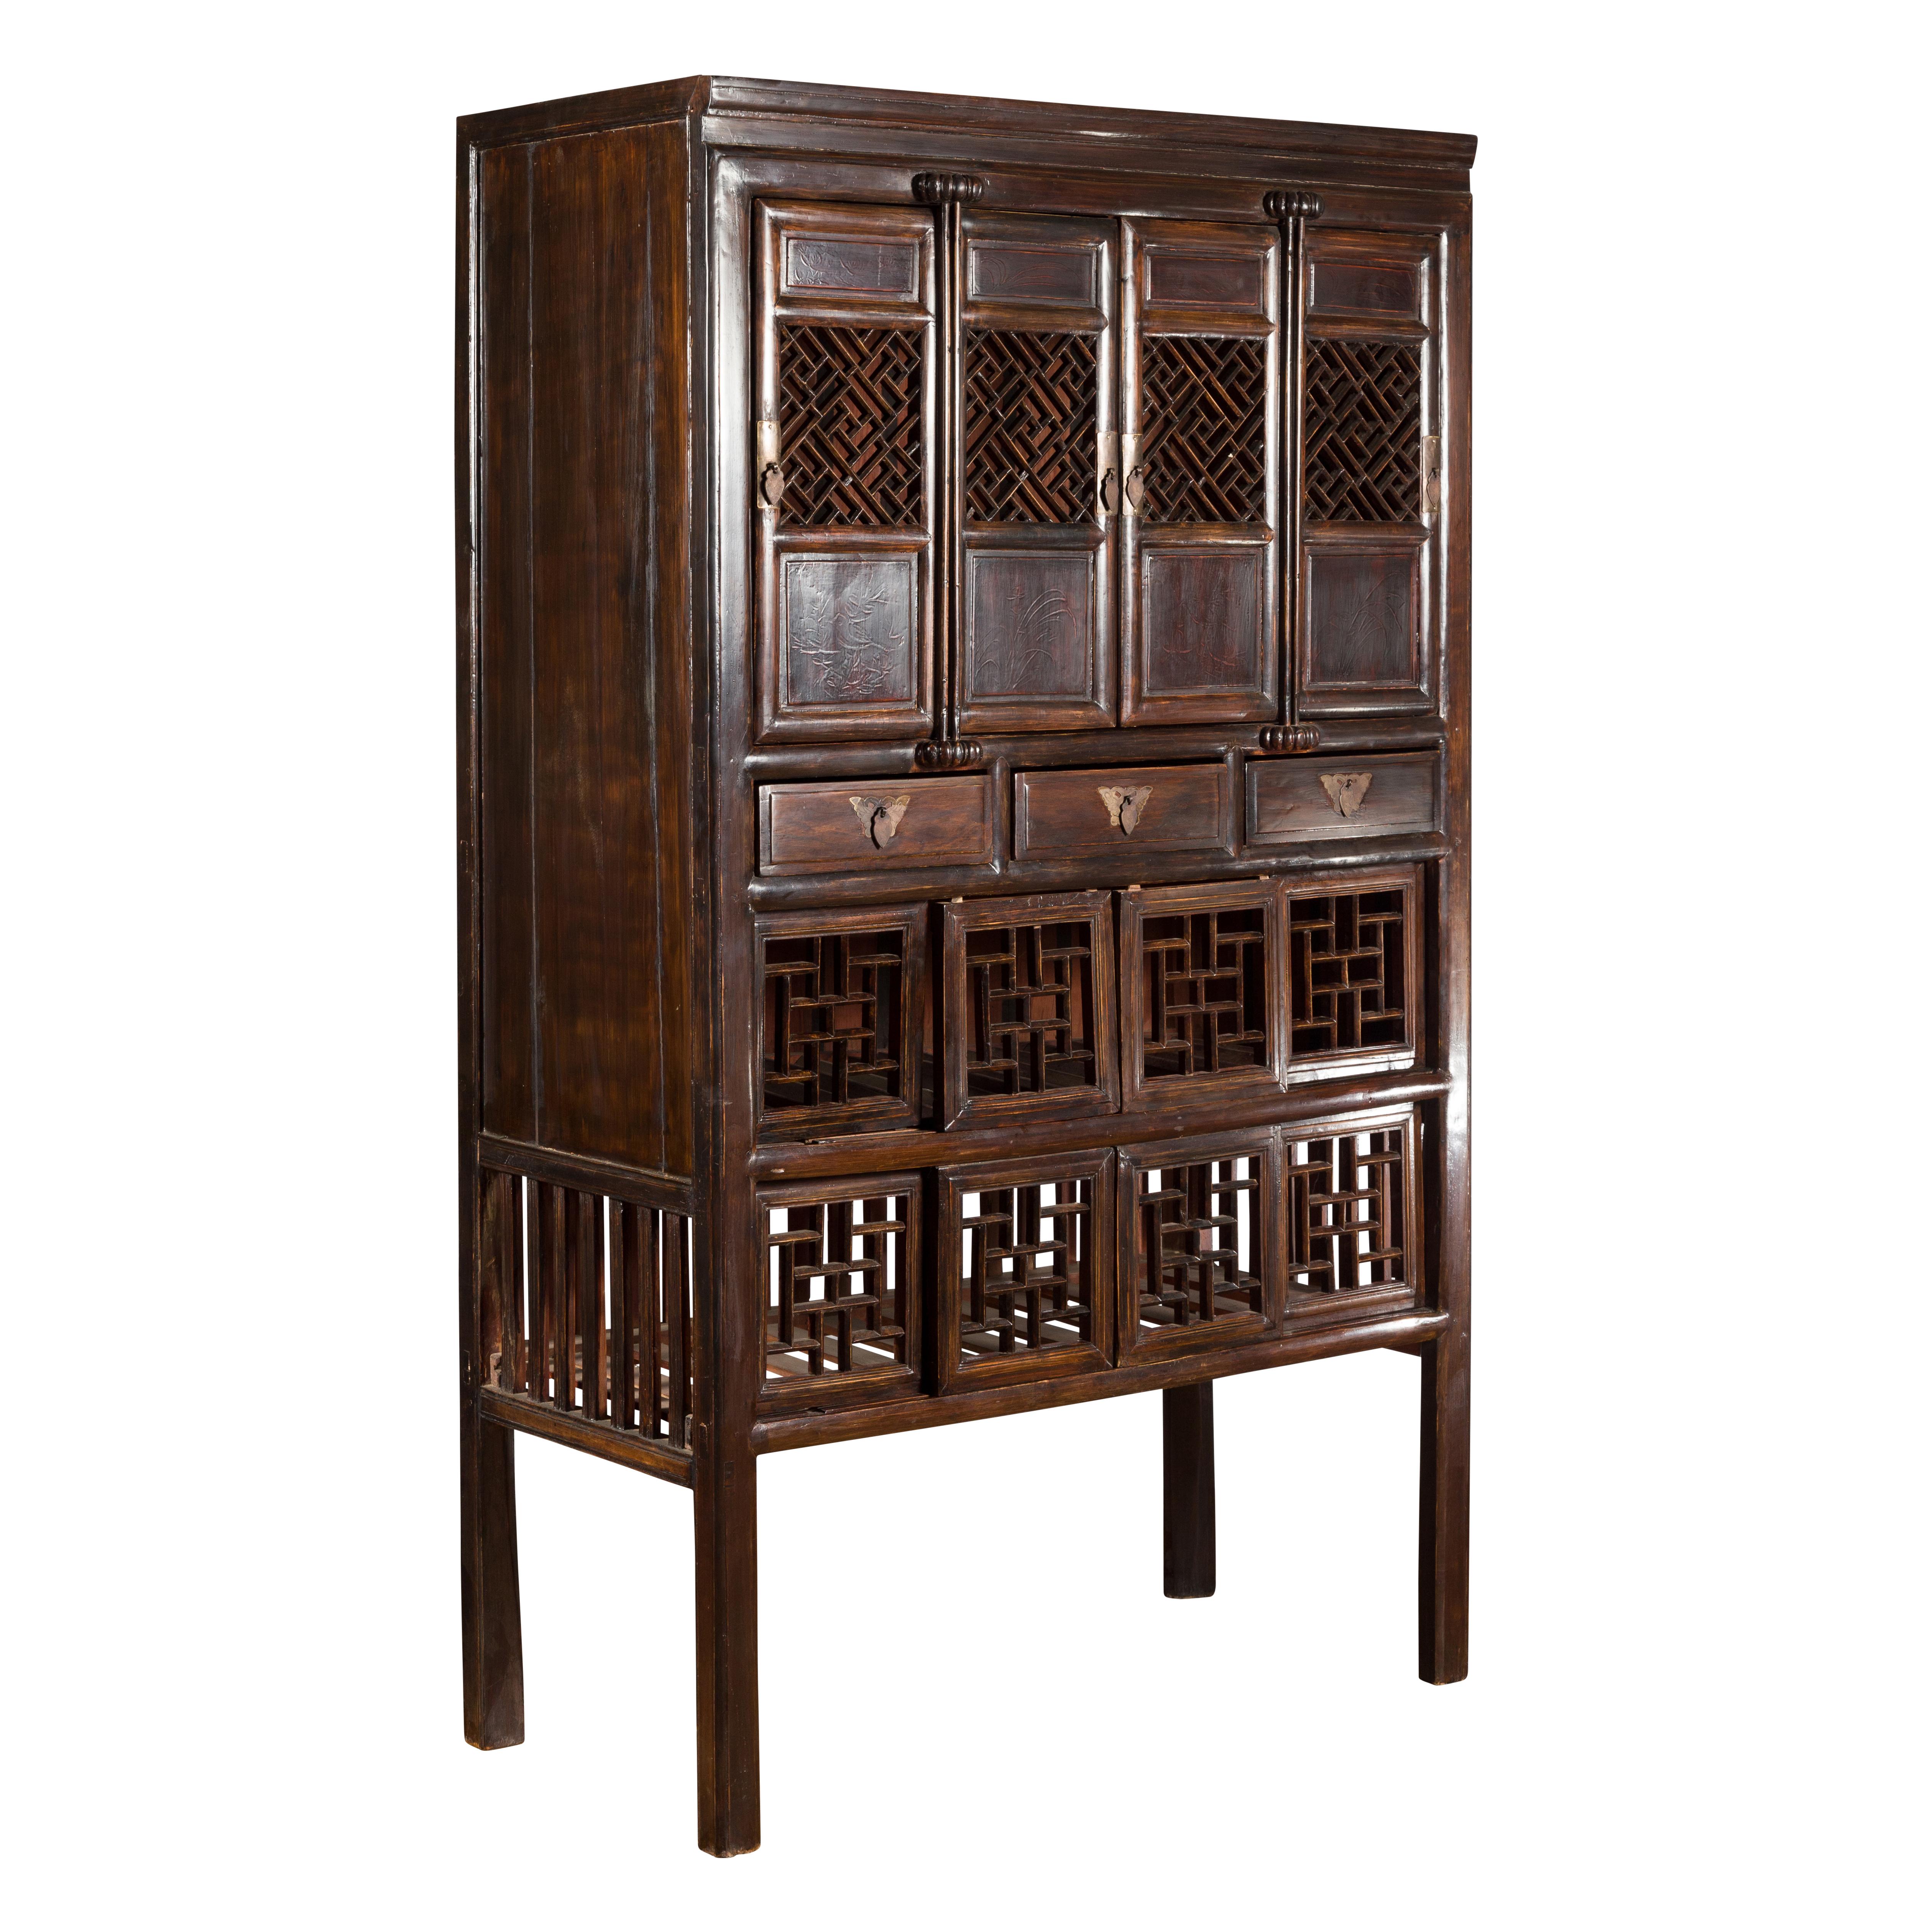 A Chinese Qing Dynasty period brown lacquered kitchen cabinet from the 19th century with geometric fretwork motifs, doors, drawers and butterfly hardware. Created in China during the Qing Dynasty, this tall Chinese cabinet features a linear